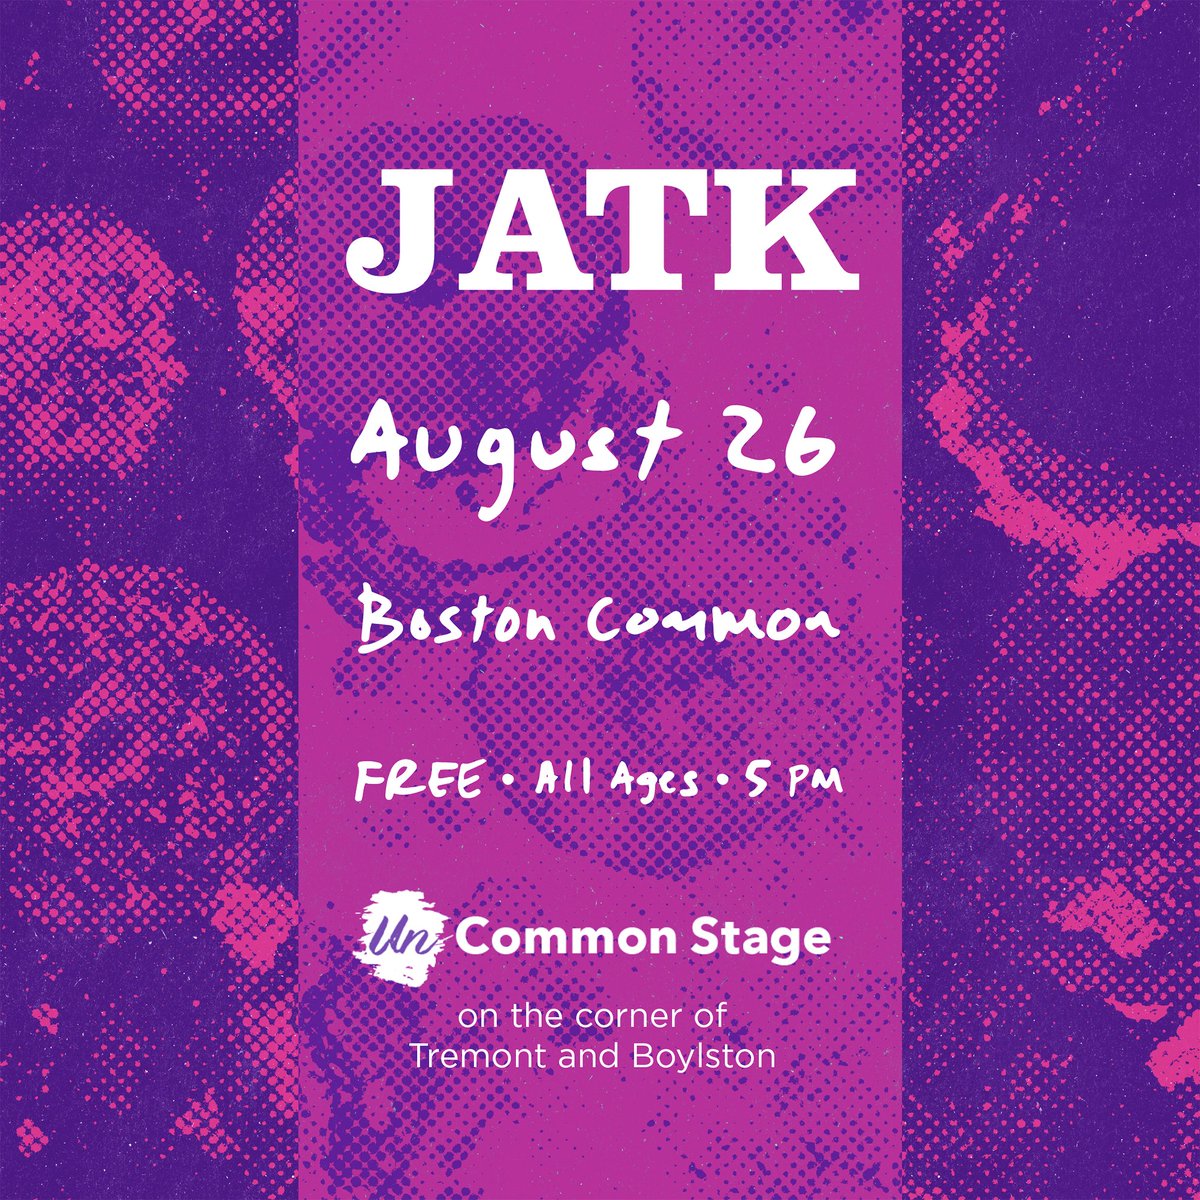 Happy August! We're playing Saturday, August 26 at #UnCommonStage on the #bostoncommon. It's #free and #allages! ✌️💜